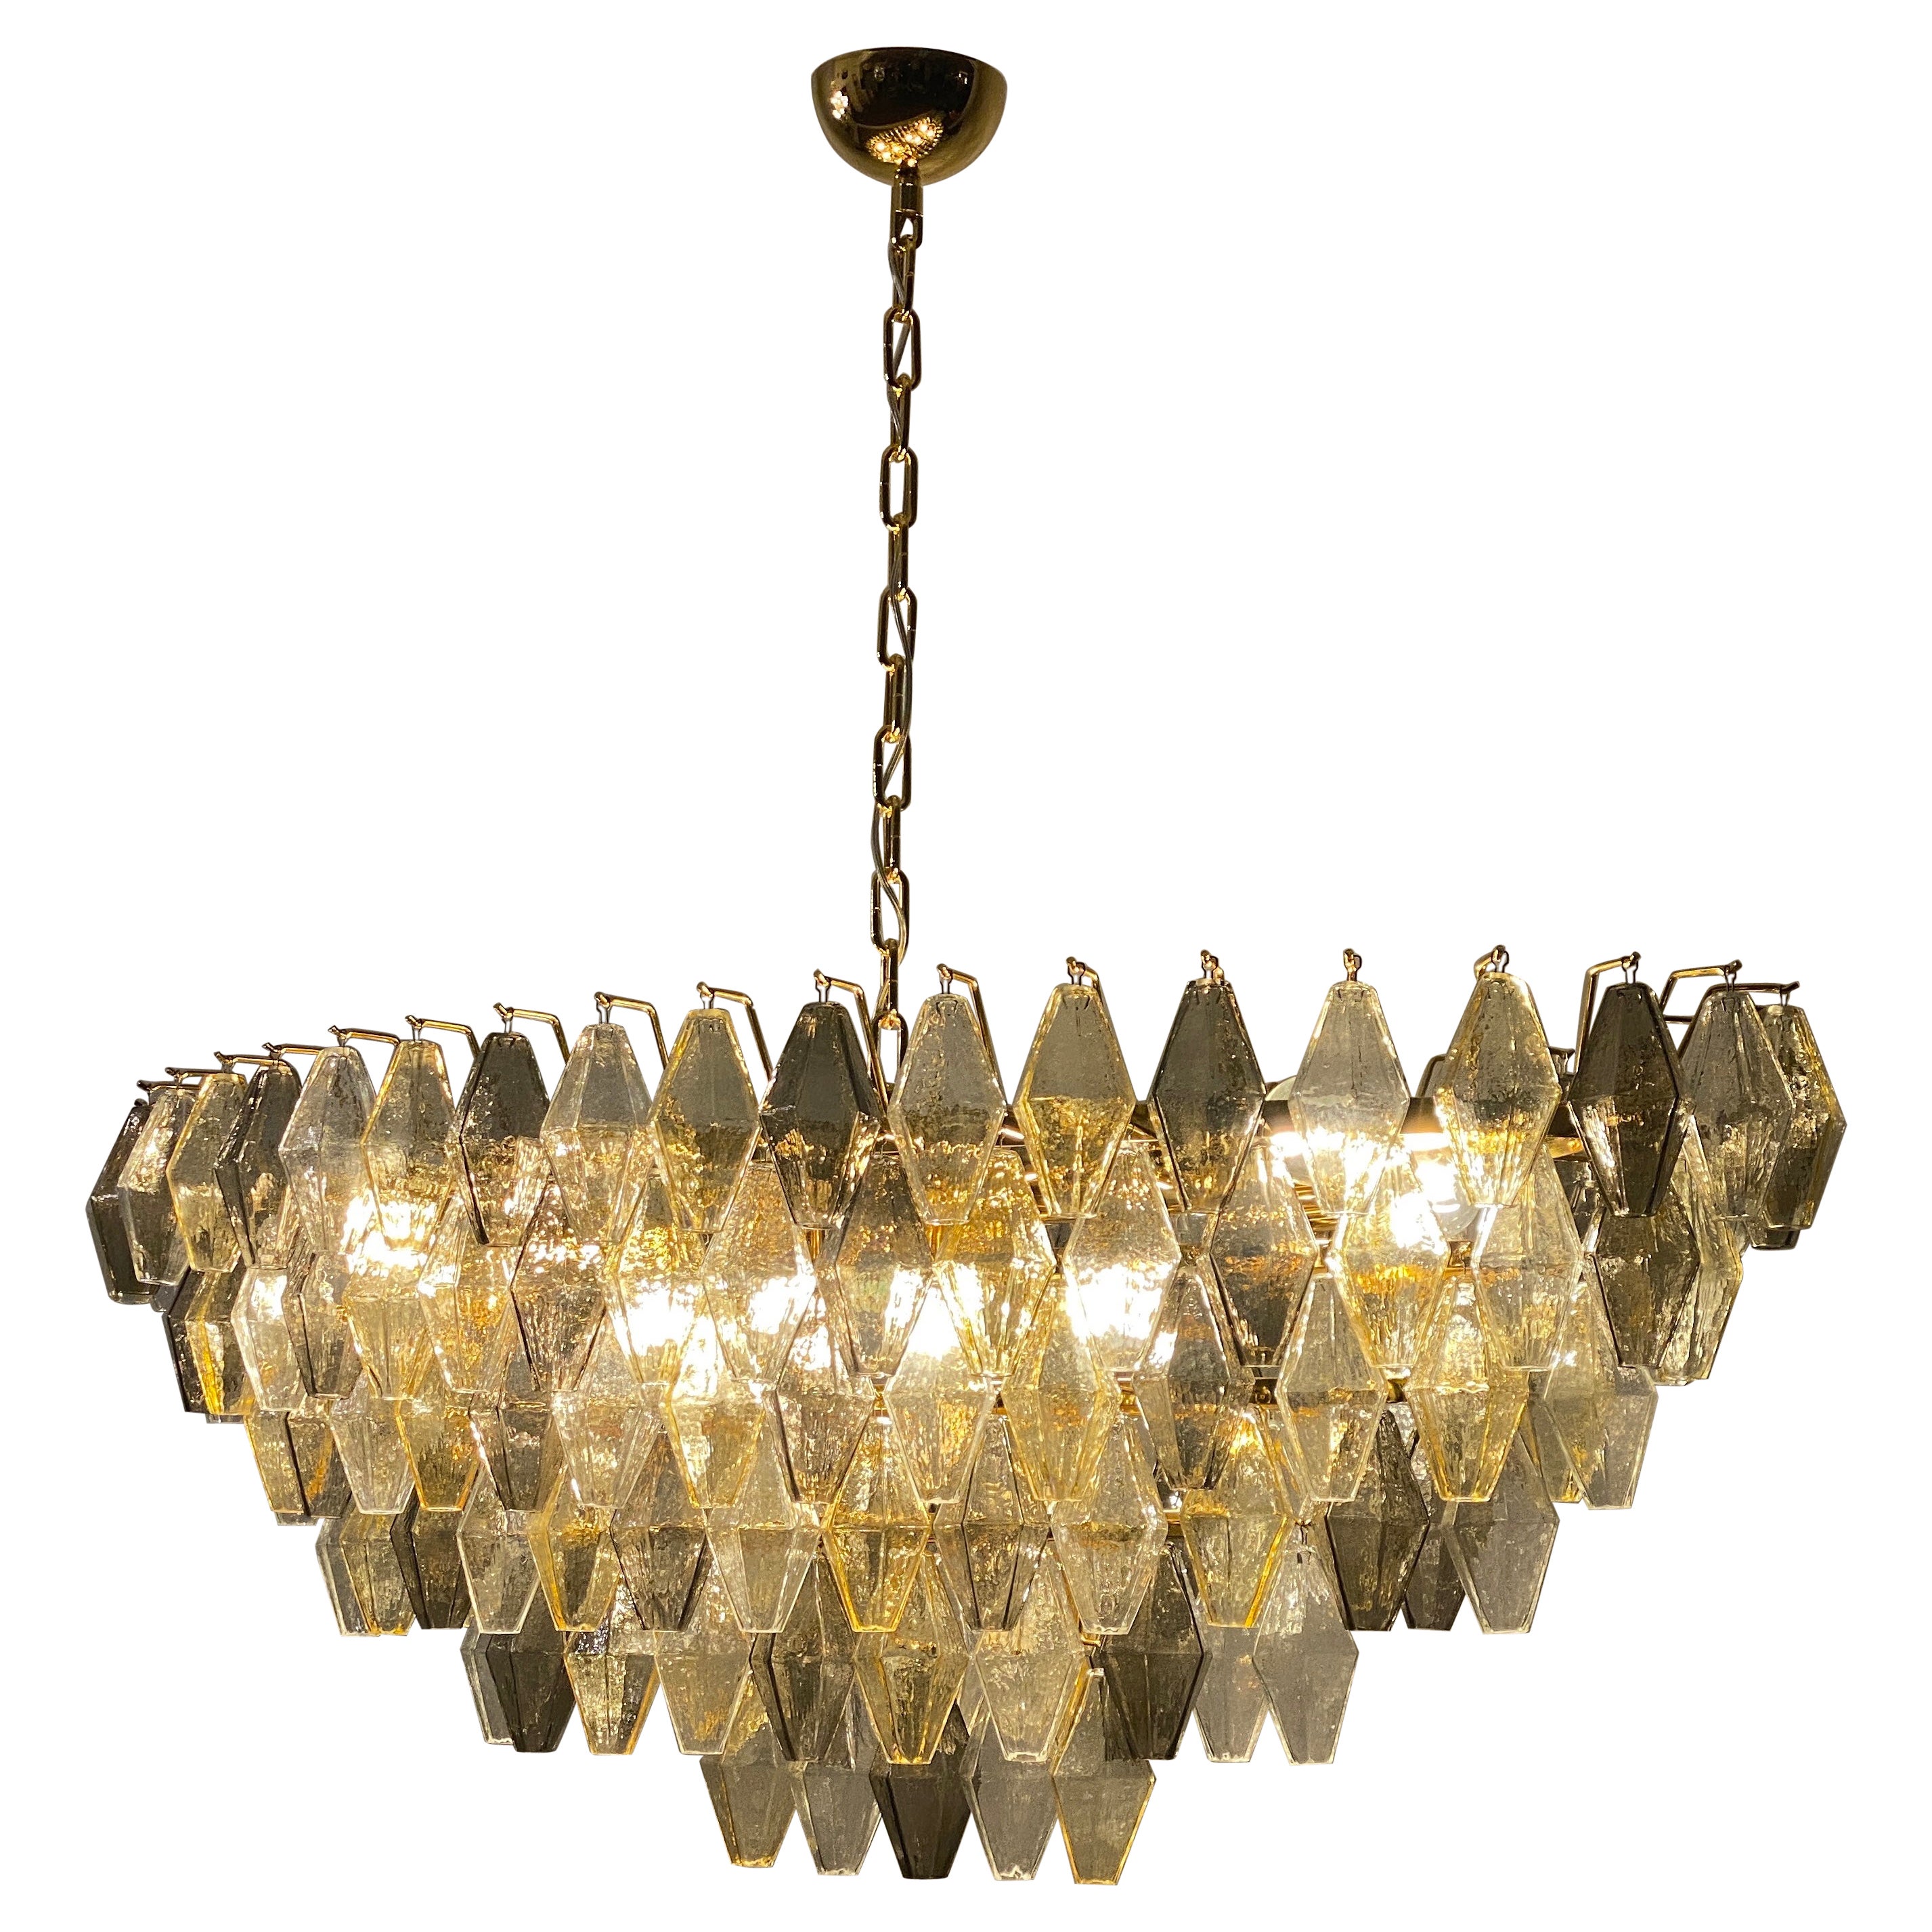 Oval Shape Amber and Grey Poliedri Murano Glass Chandelier or Ceiling Light For Sale